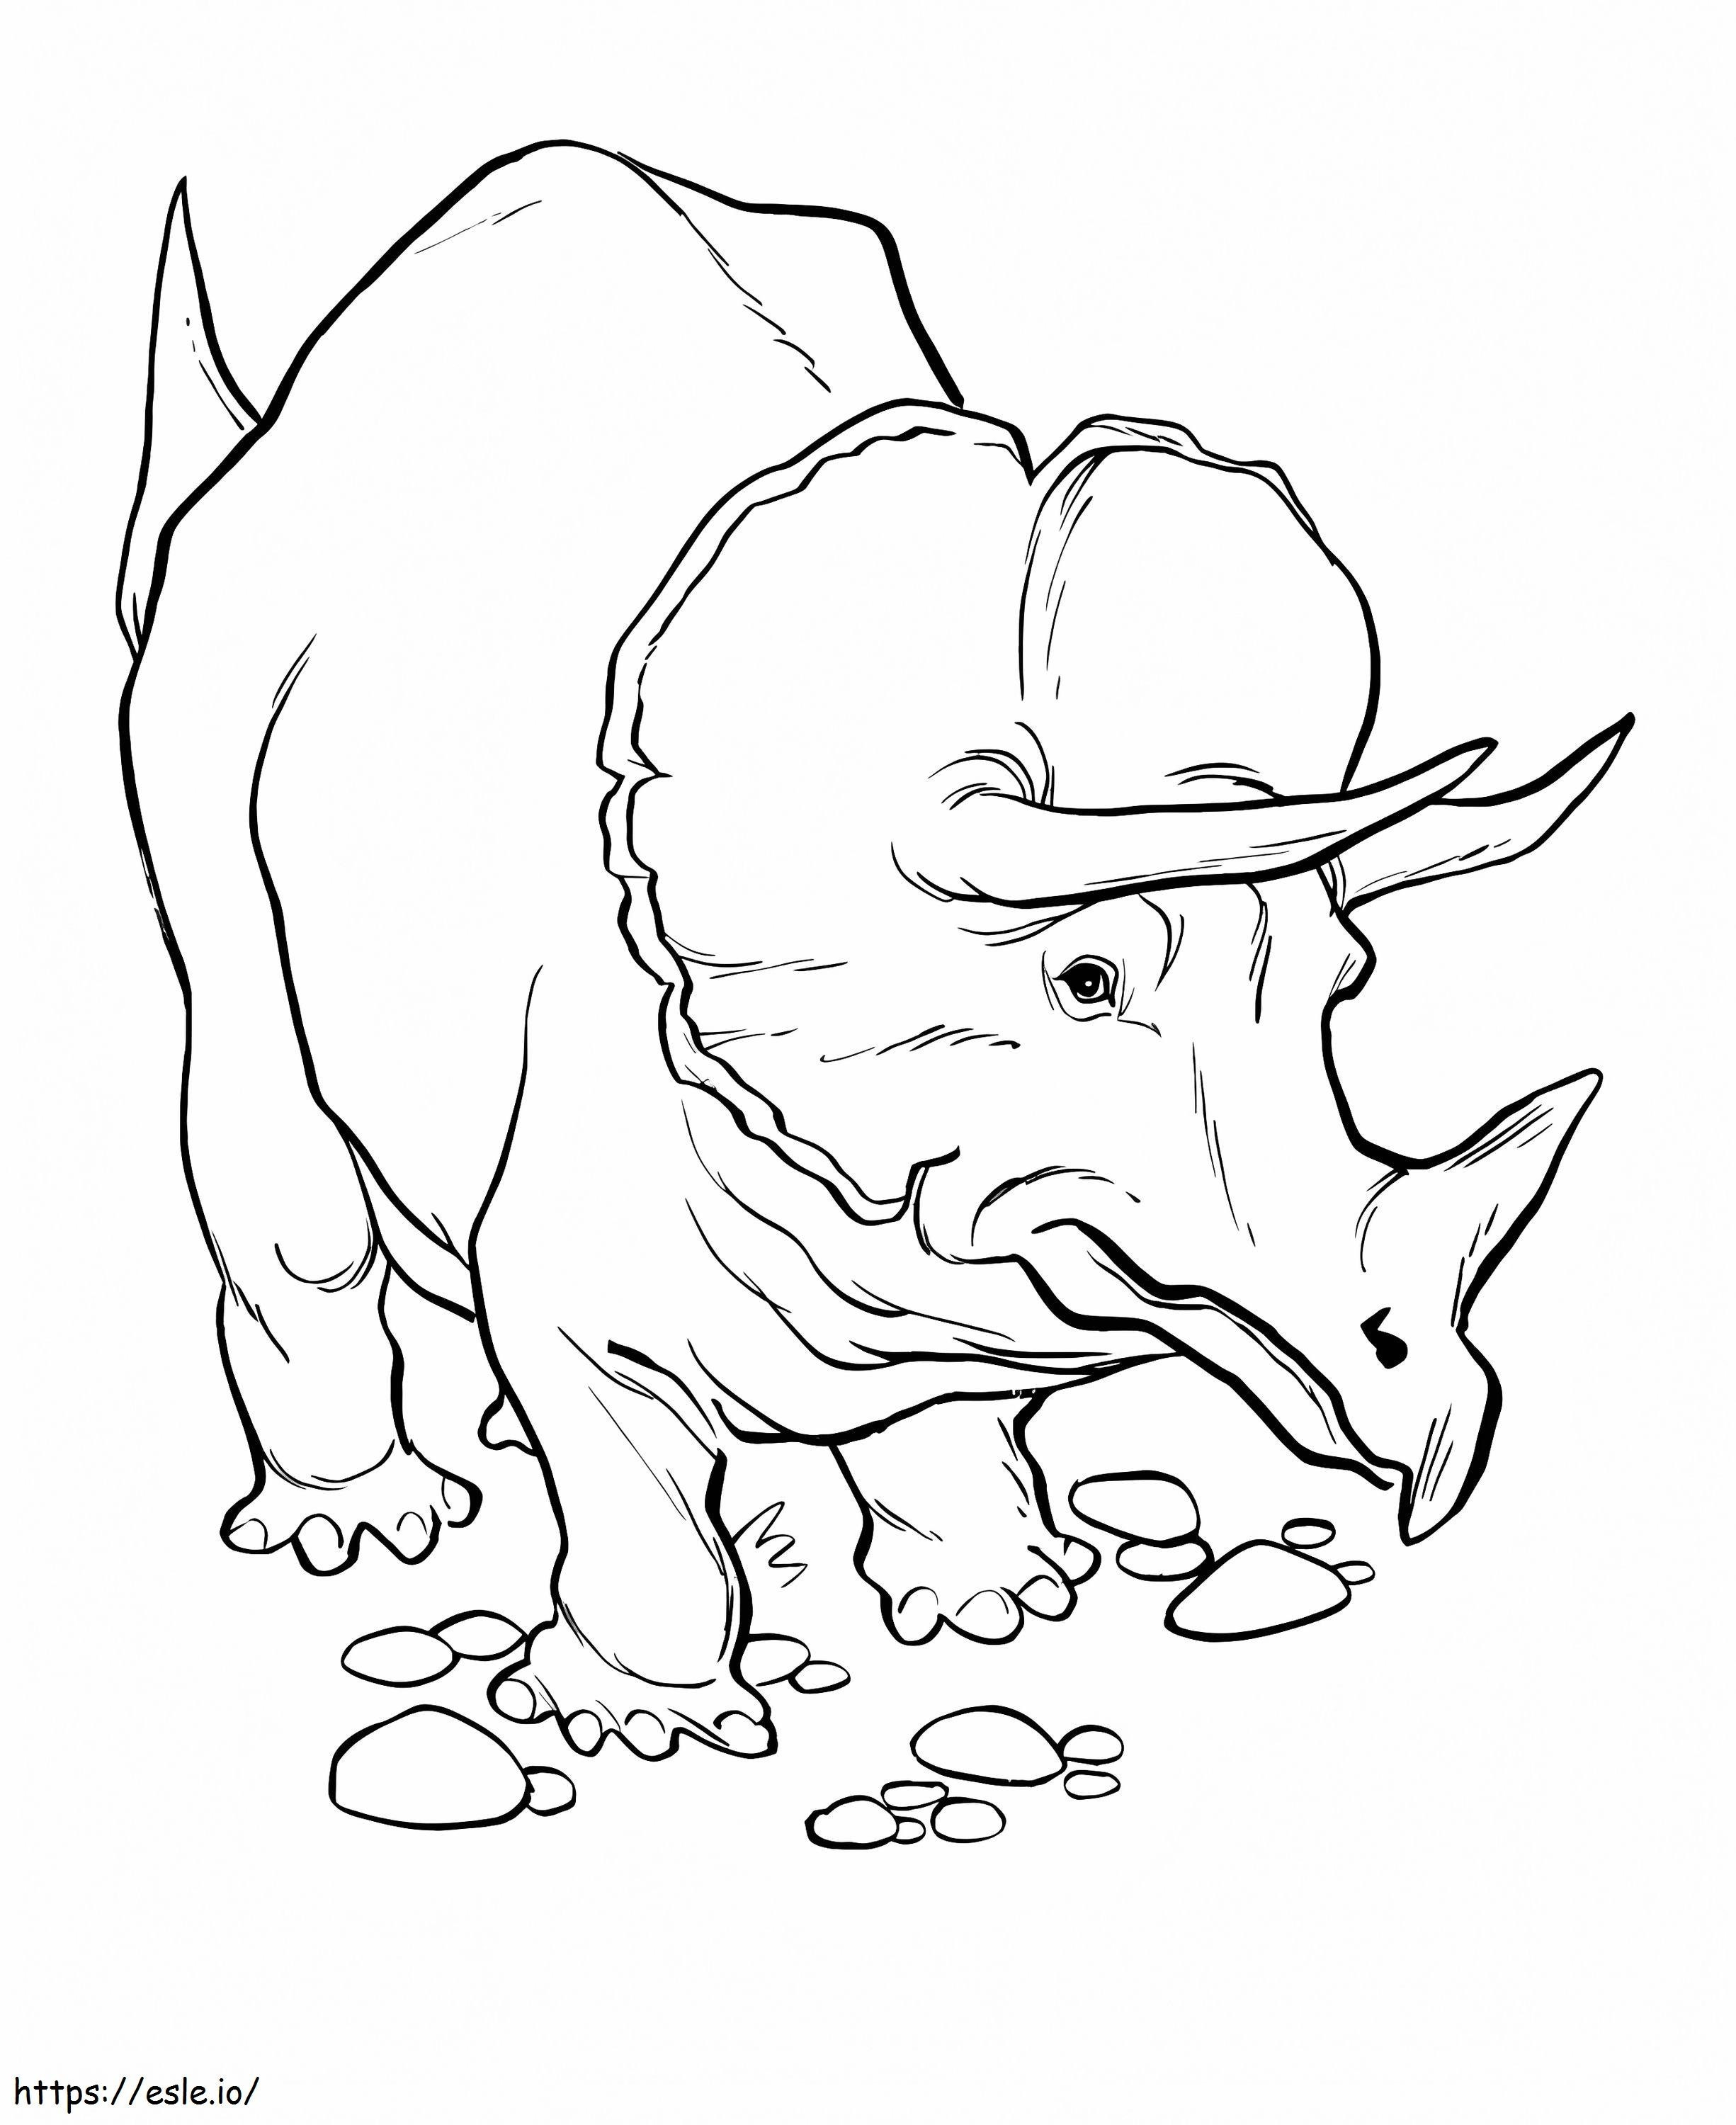 Dinosaure Triceratops 3 coloring page